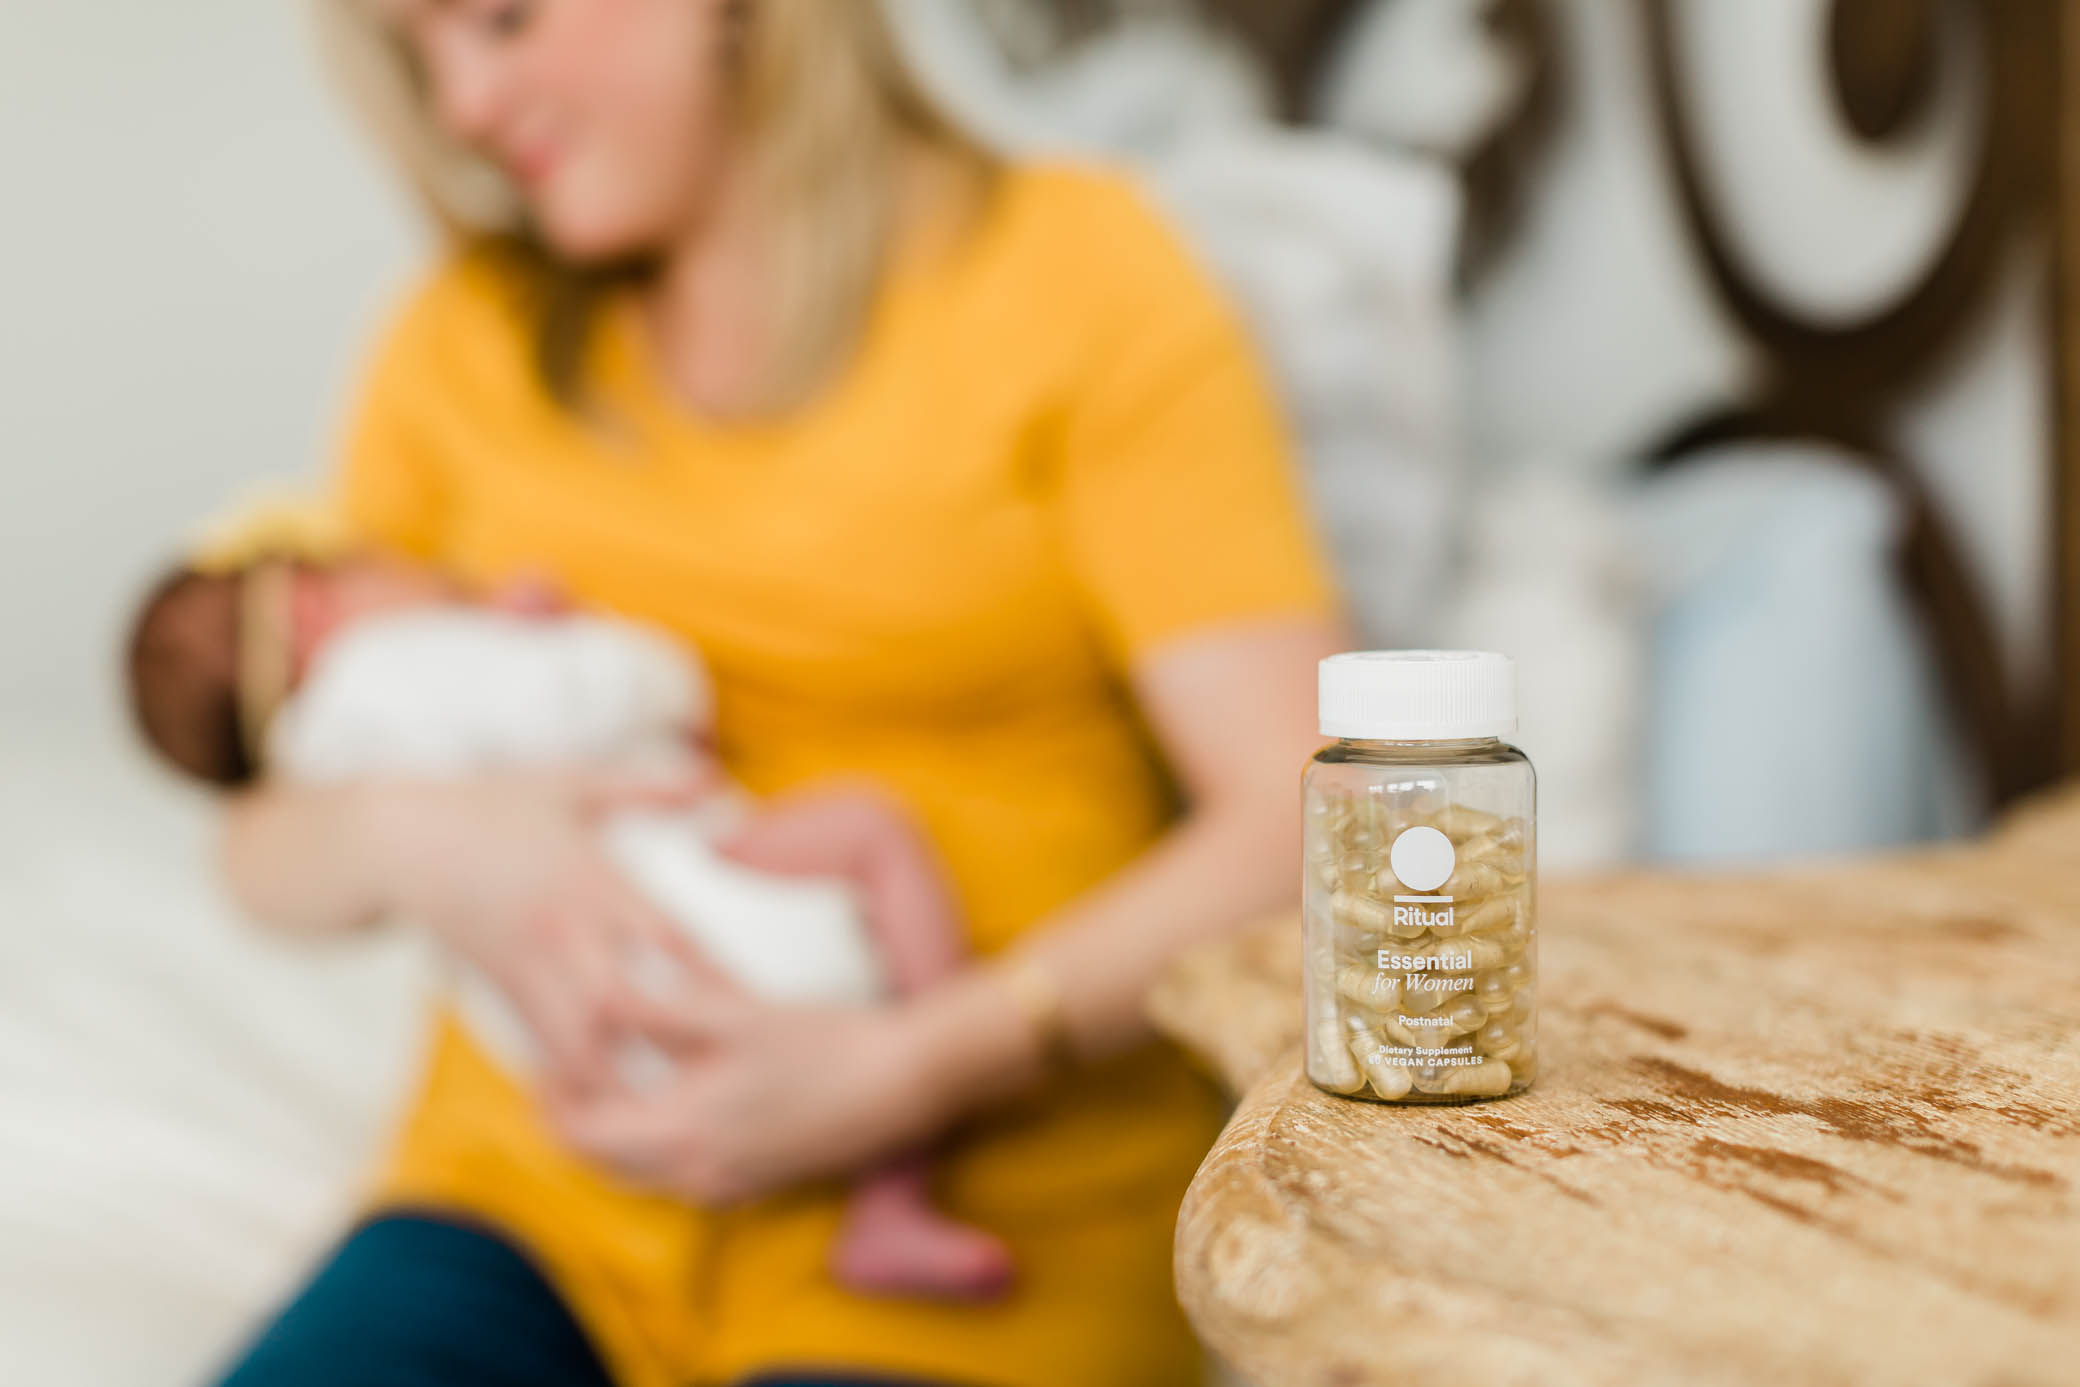 Ritual Postnatal multivitamin bottle with a mom breastfeeding her baby in the background.